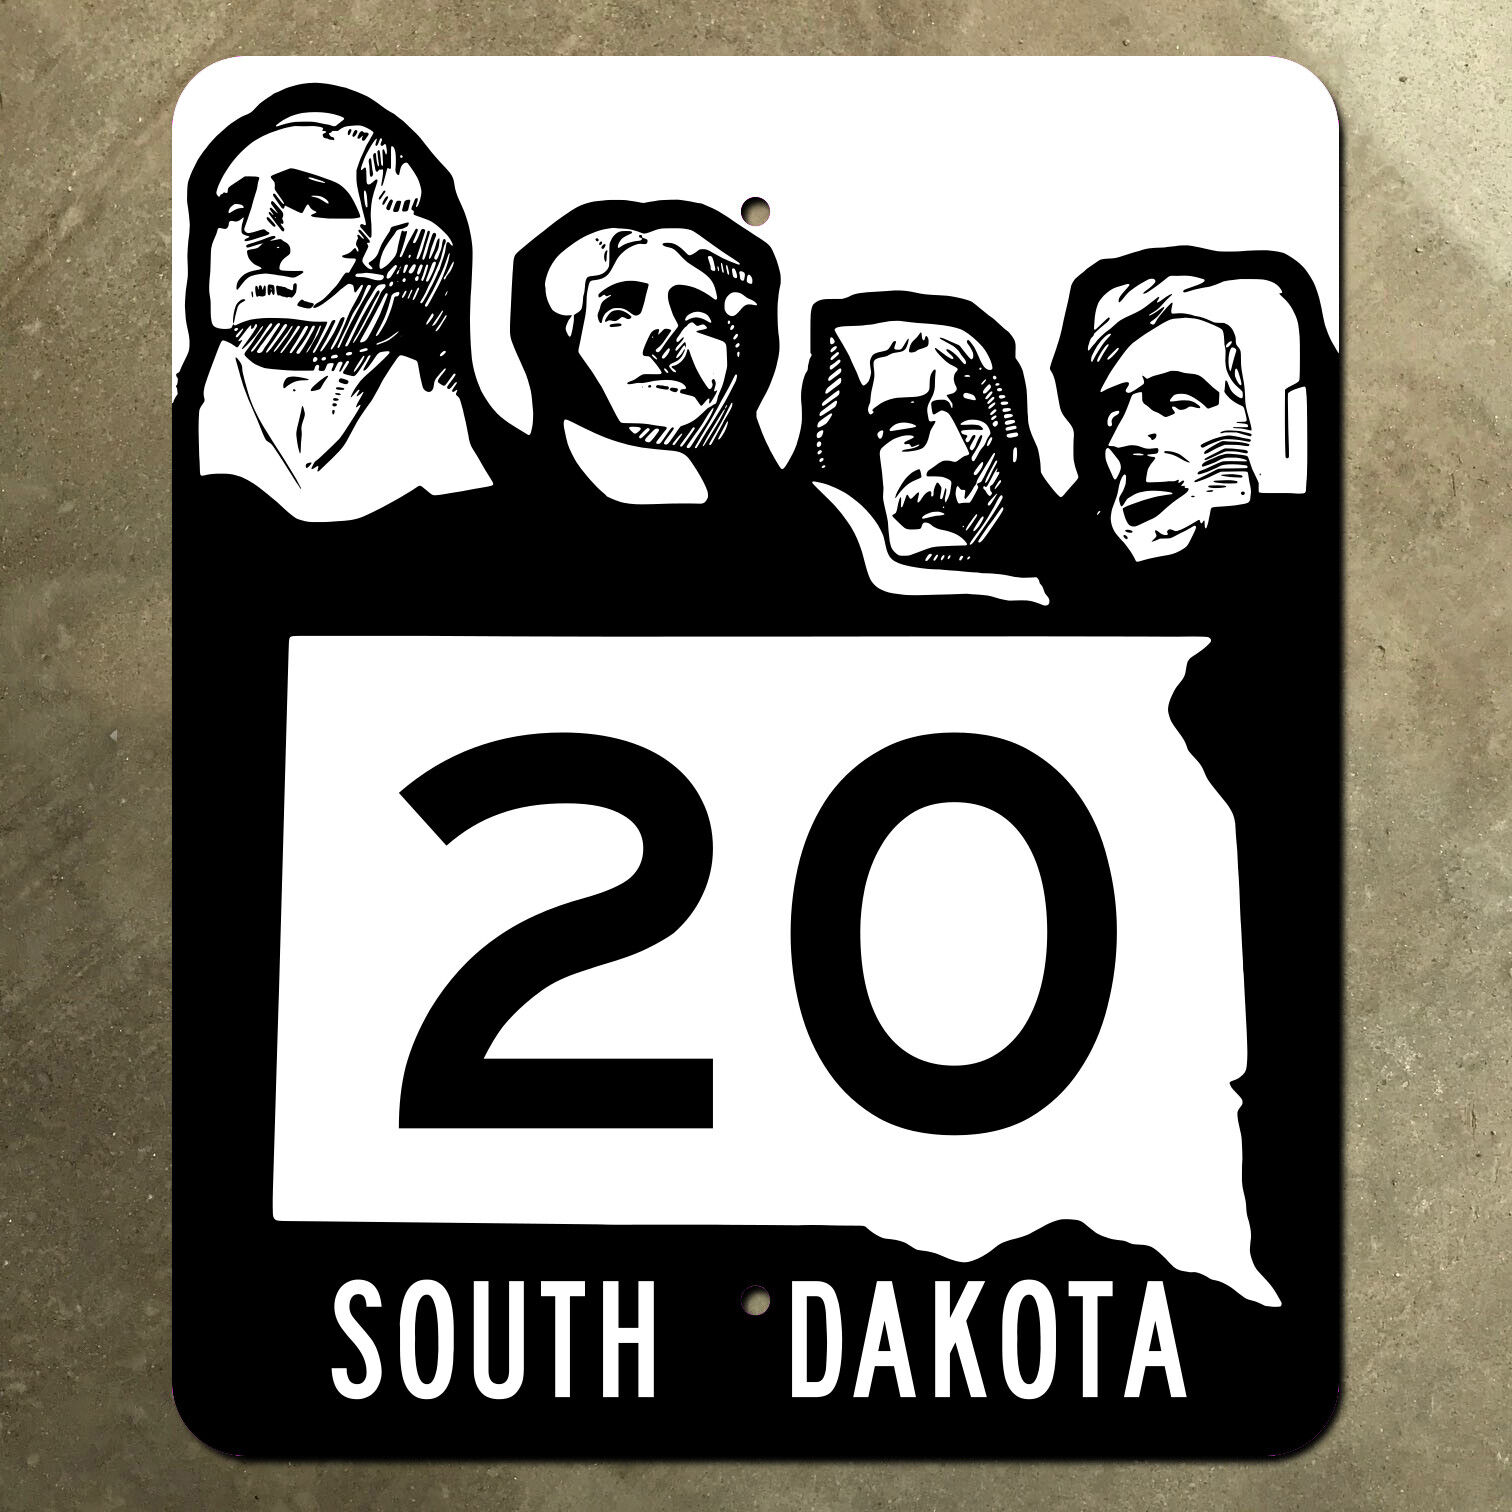 South Dakota state route 20 highway marker road sign Mount Rushmore 1957 10x12